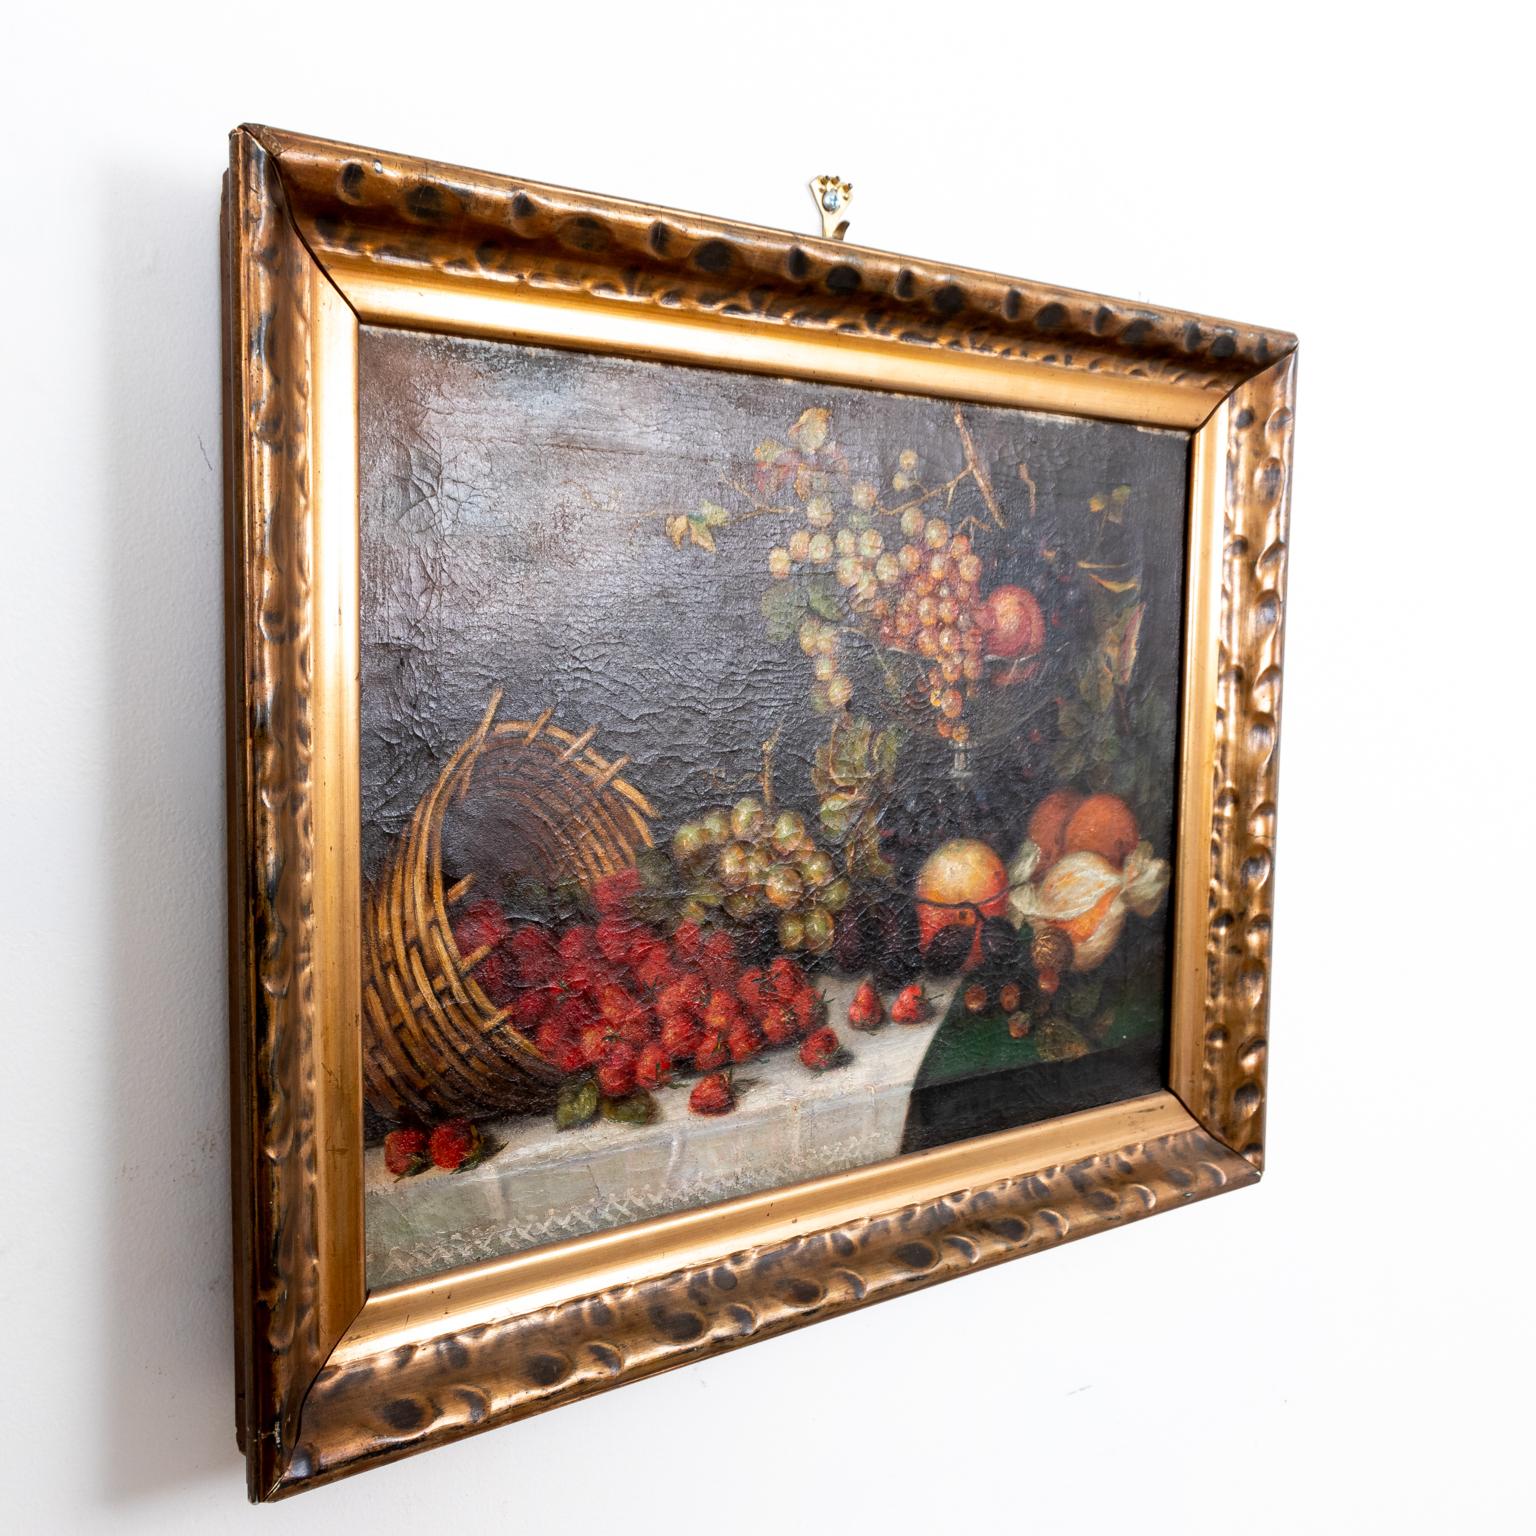 Circa 19th century still life of strawberries, peaches, grapes and other fruits in a period frame. The piece is in the medium oil on canvas and signed by the artist L. Sitzunnel on the lower right. Please note of wear consistent with age.